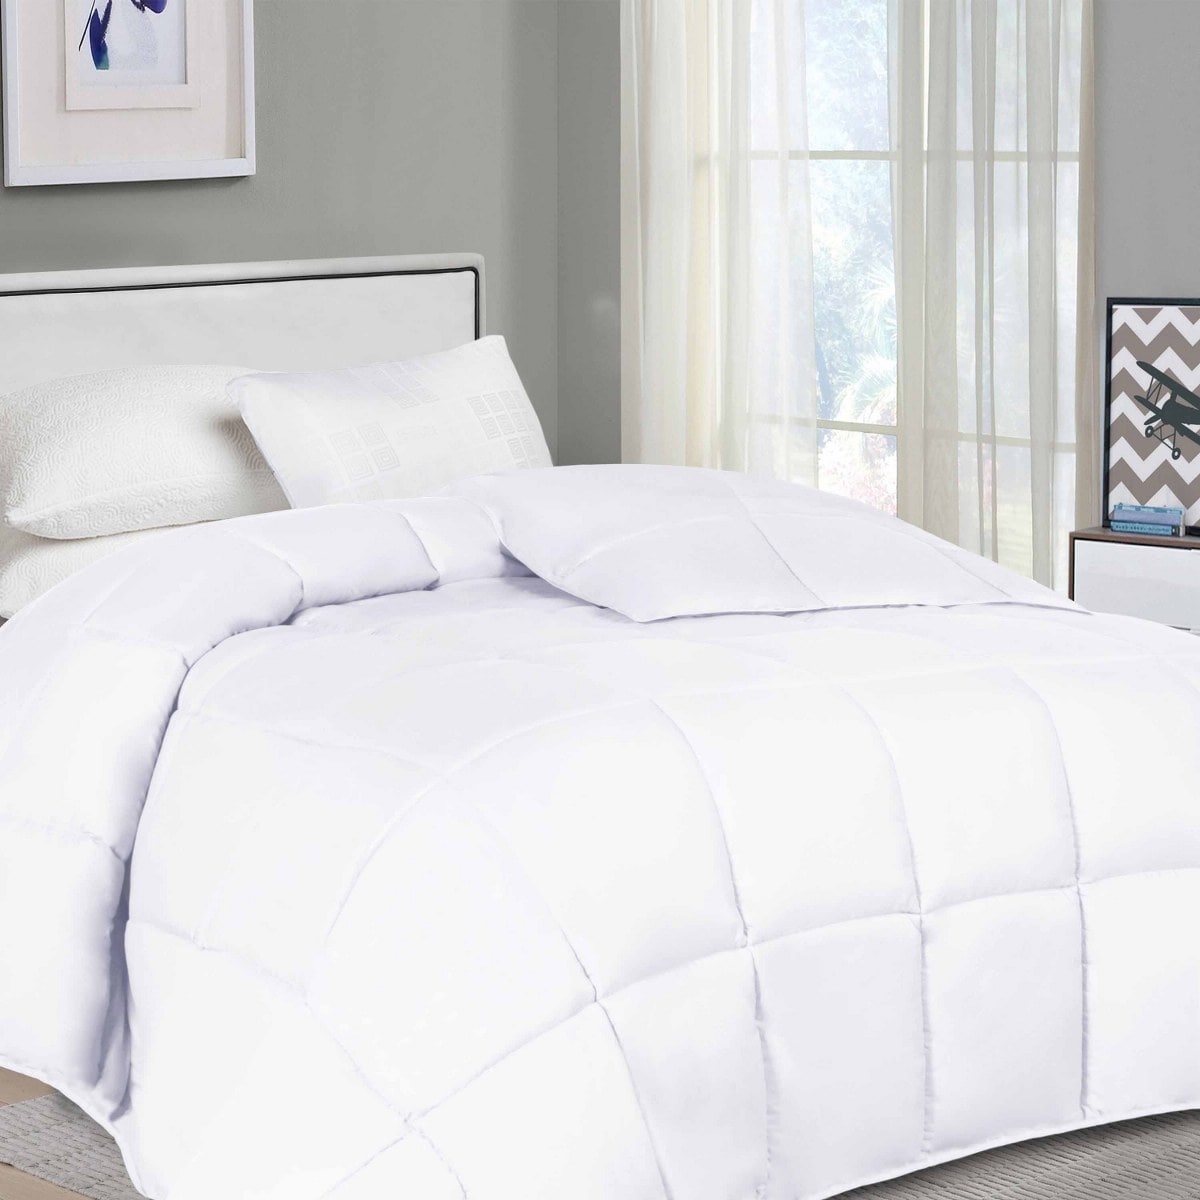 https://ak1.ostkcdn.com/images/products/is/images/direct/0fd1c428746839a6532ba60485055071e70bdebf/Superior-Solid-Comforter-Reversible-Microfiber-Down-Alternative-Bedding.jpg